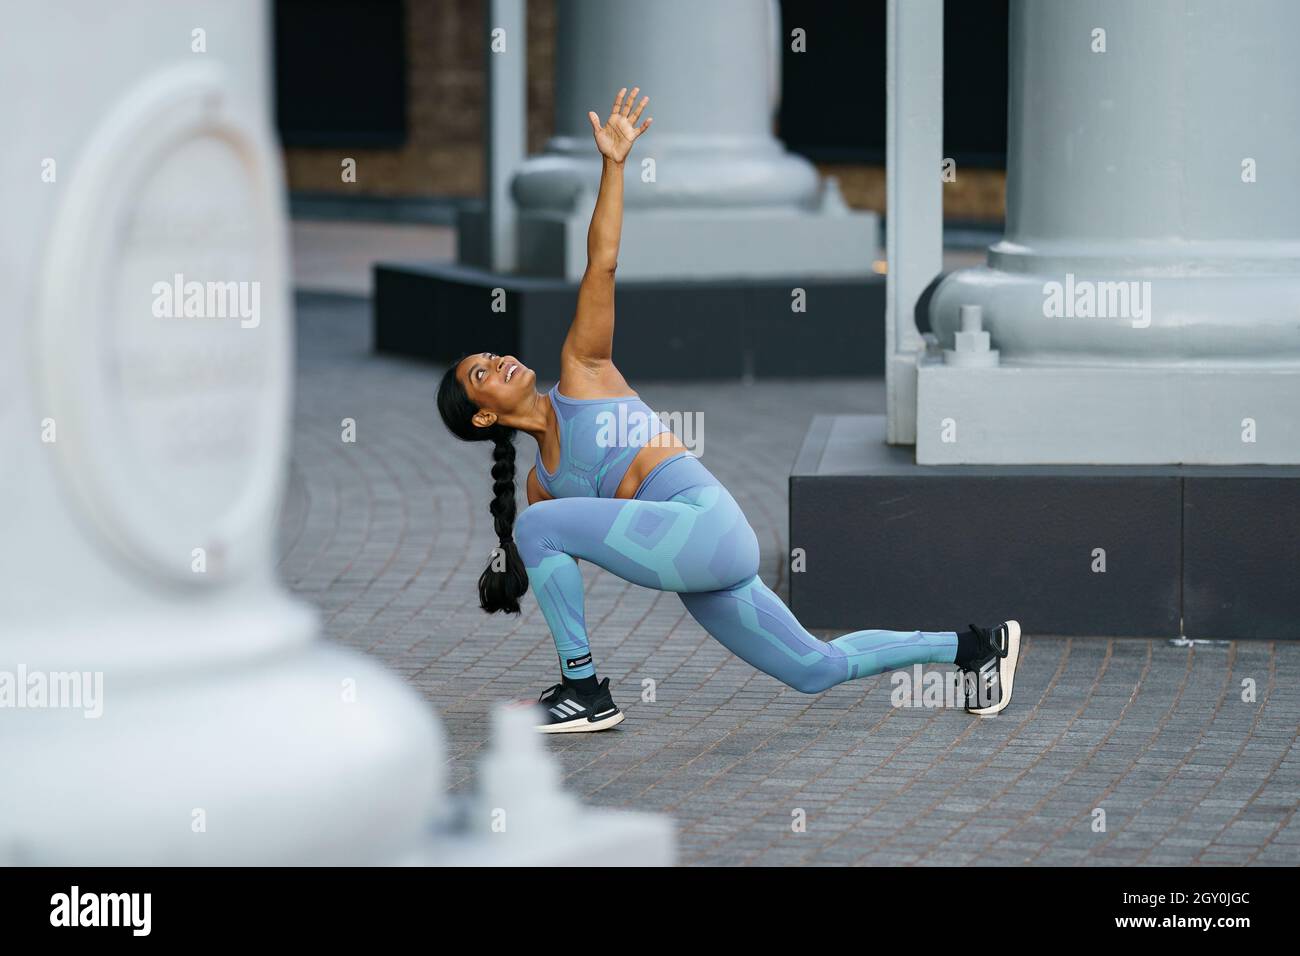 Woman in a grey outfit stretching before a workout in an urban setting Stock Photo